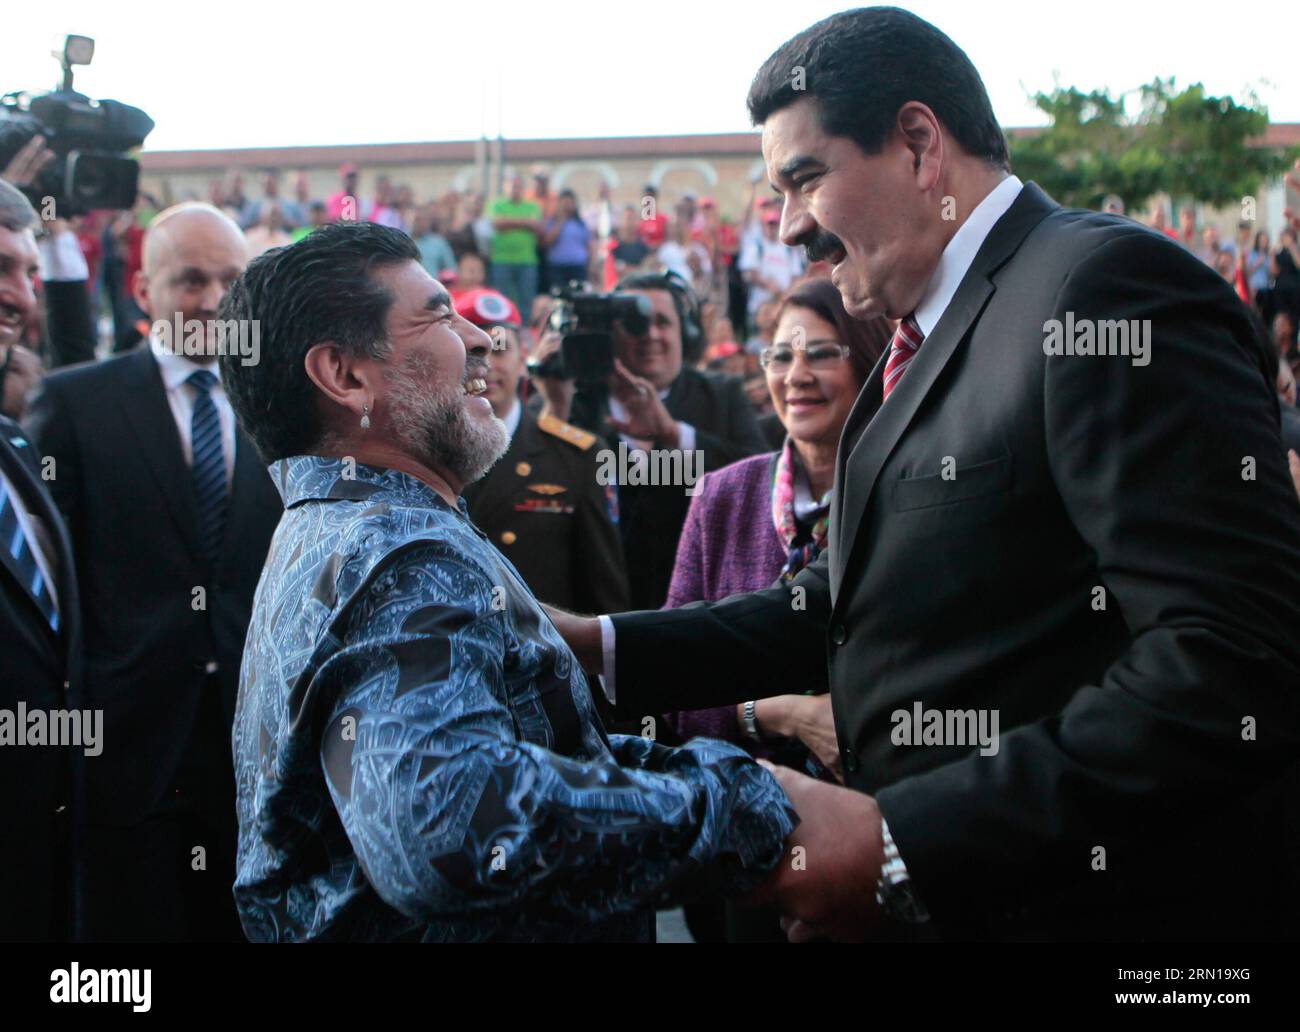 CARACAS, Dec. 9, 2014 -- Image provided by shows Venezuelan President Nicolas Maduro R greeting former Argentine soccer Player Diego Armando Maradona during a ceremony marking the 190th anniversary of the Battle of Ayacucho, at the National Pantheon in Caracas, Venezuela, on Dec. 9, 2014.  SPVENEZUELA-CARACAS-POLITICS-MADURO VENEZUELA SxPRESIDENCY PUBLICATIONxNOTxINxCHN Stock Photo